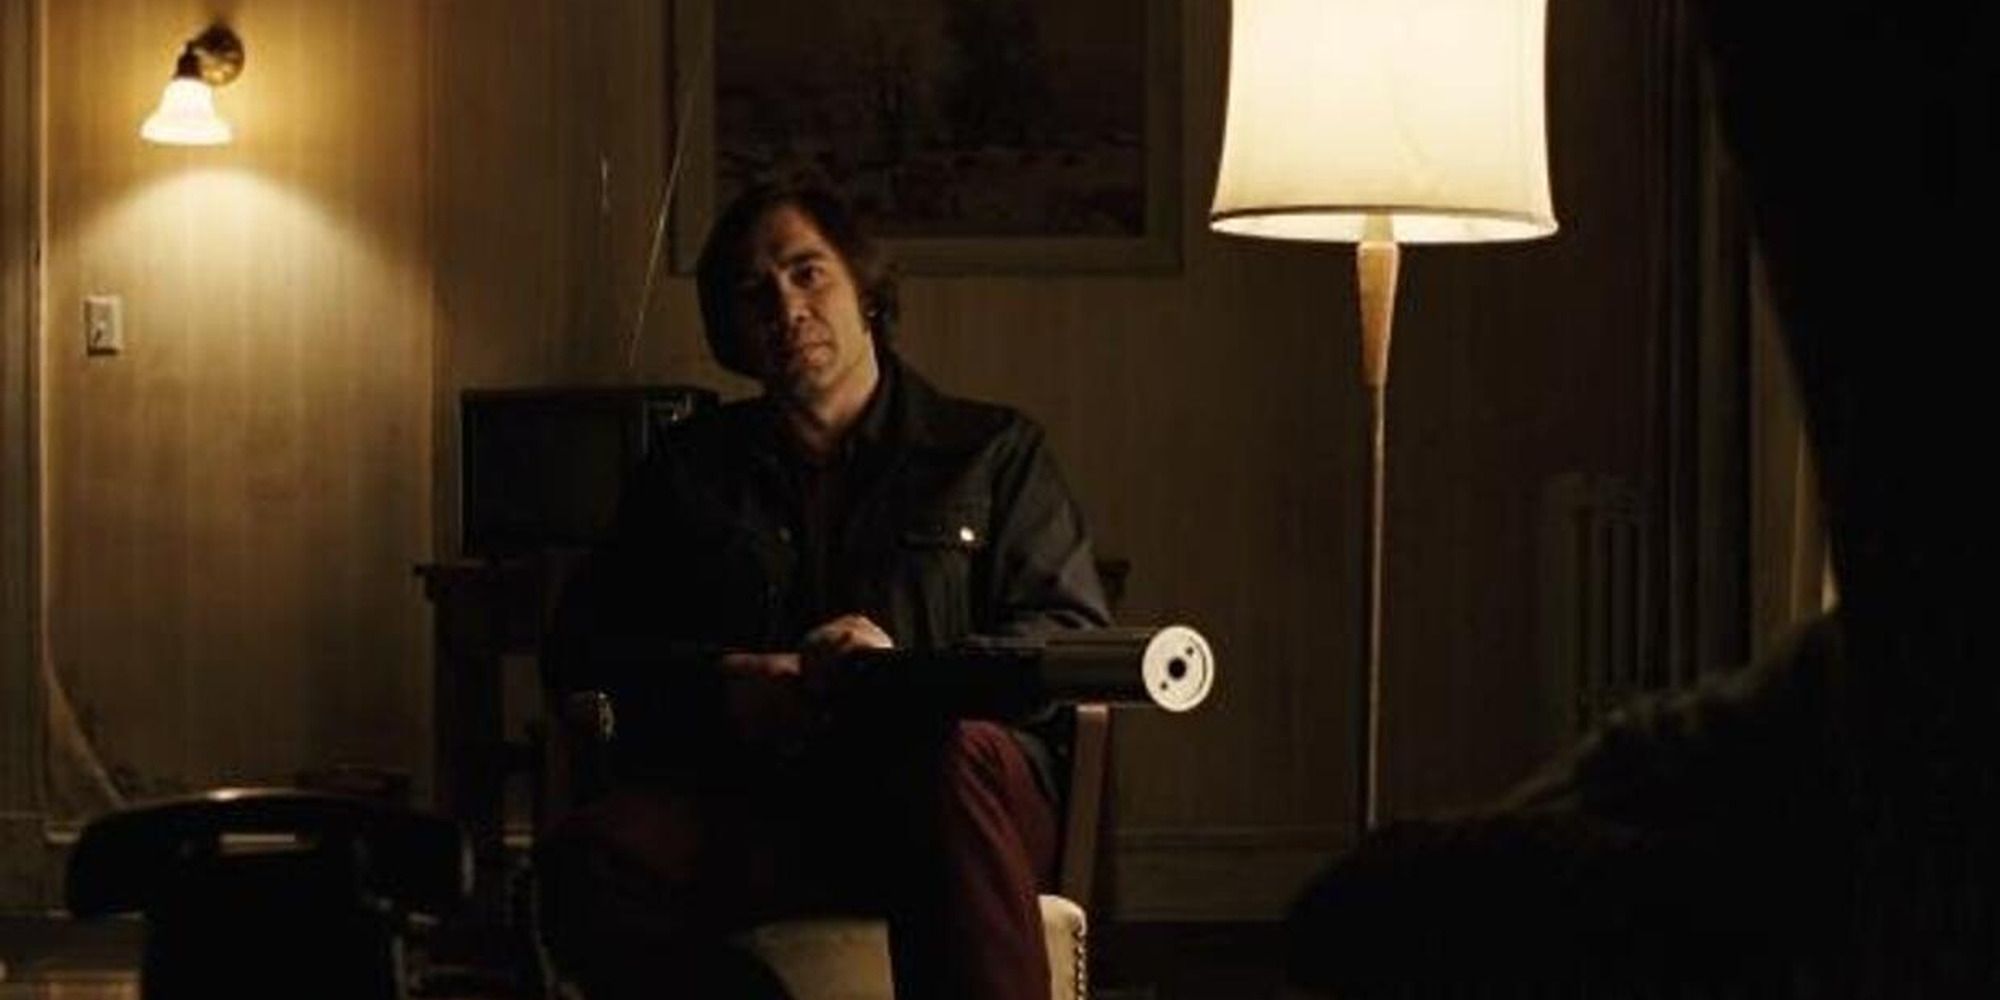 Anton Chigurh from No Country for Old Men, pointing his gun at an unseen figure